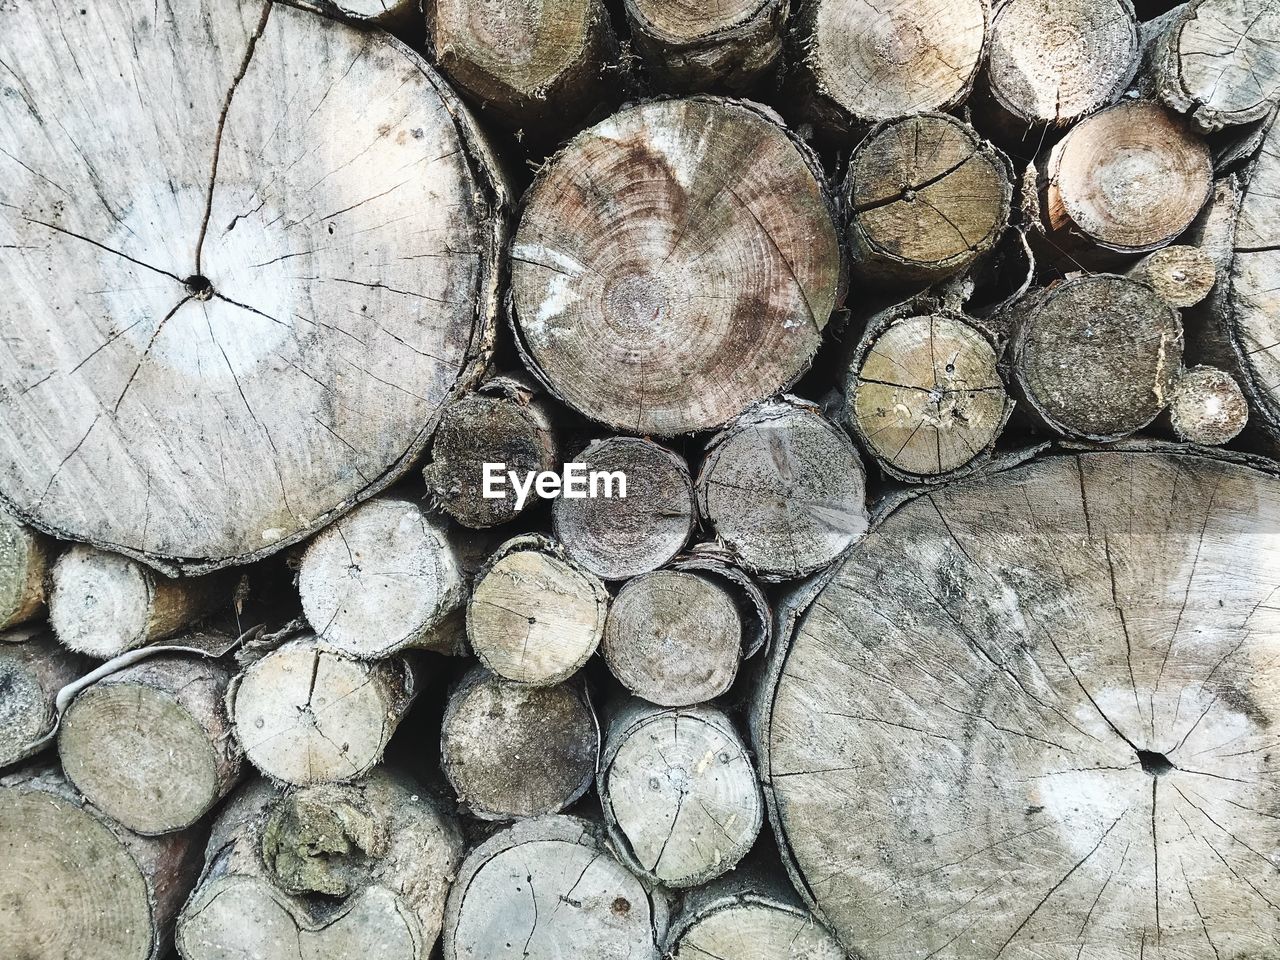 STACK OF LOGS IN FOREST